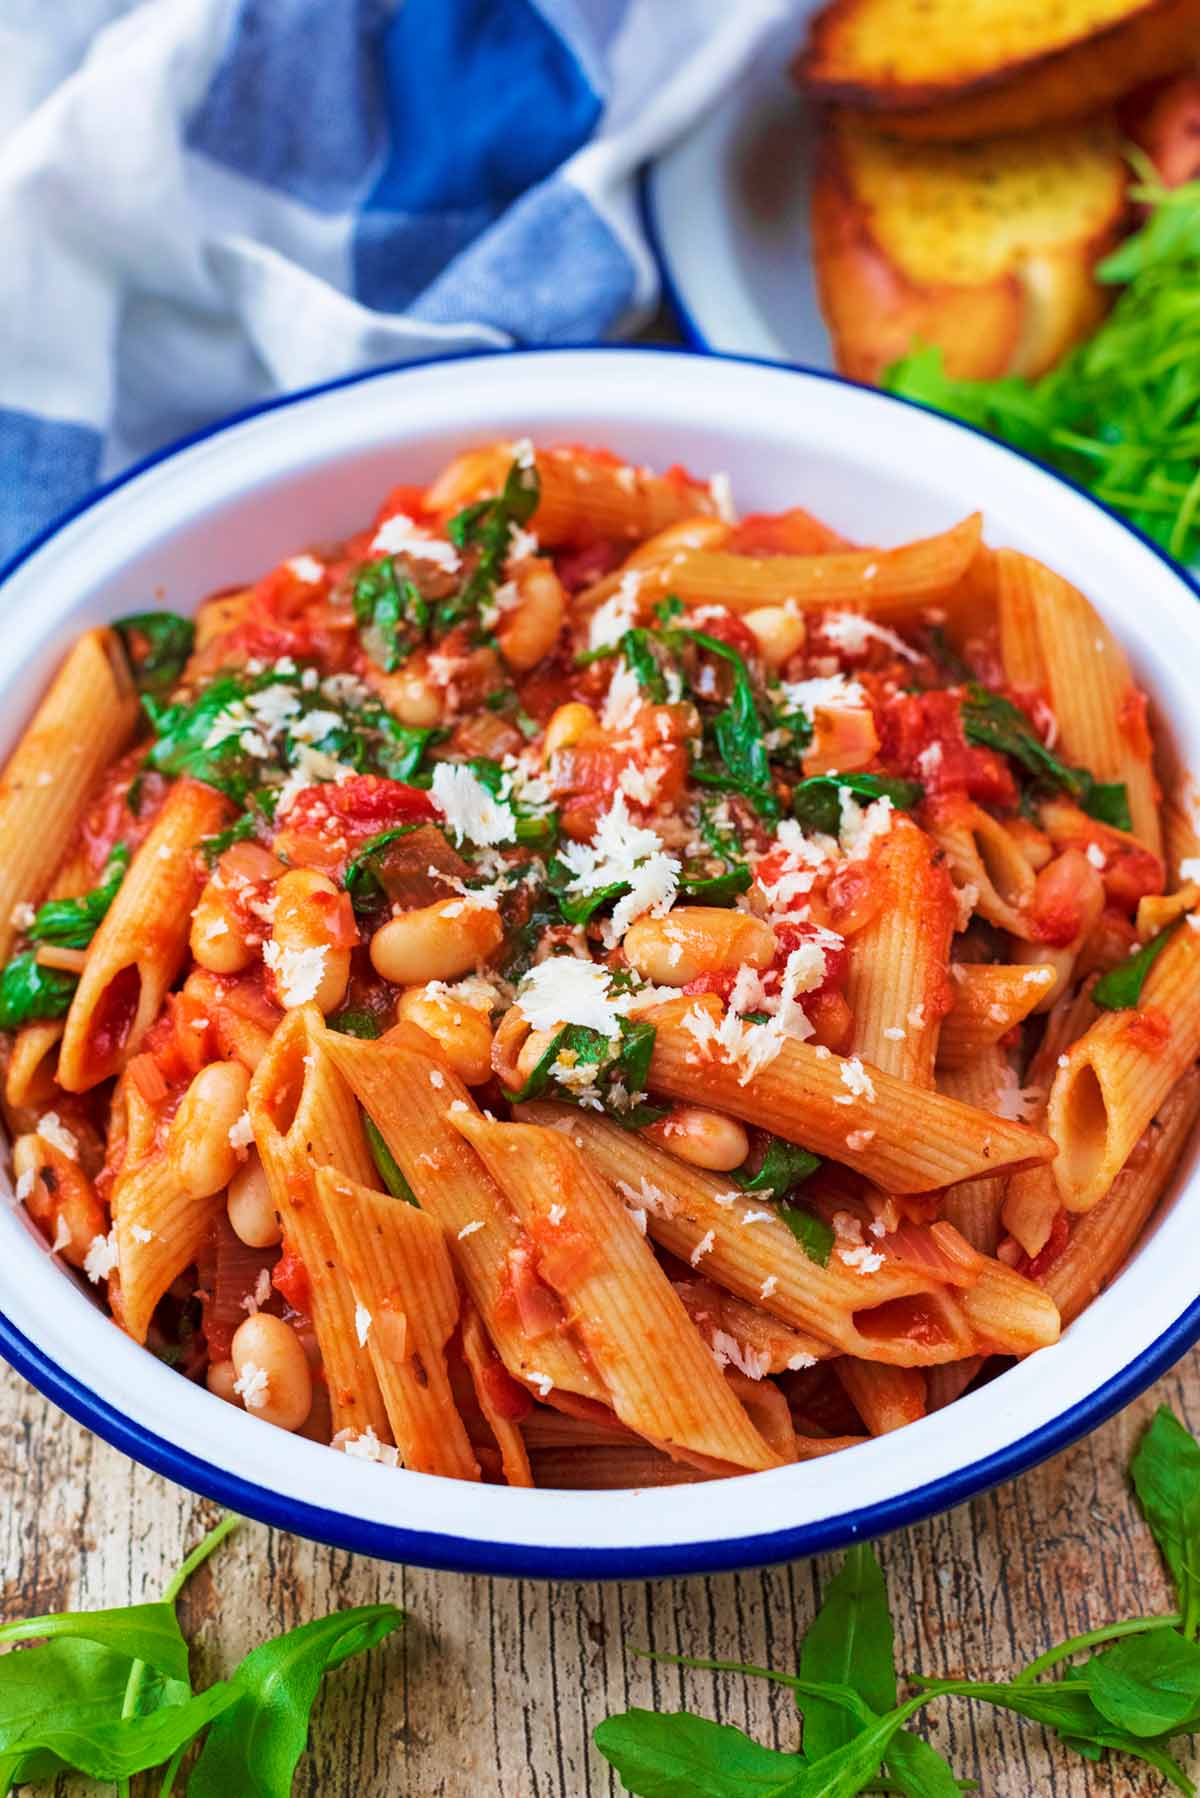 A bowl of pasta in a tomato sauce with beans and herbs.